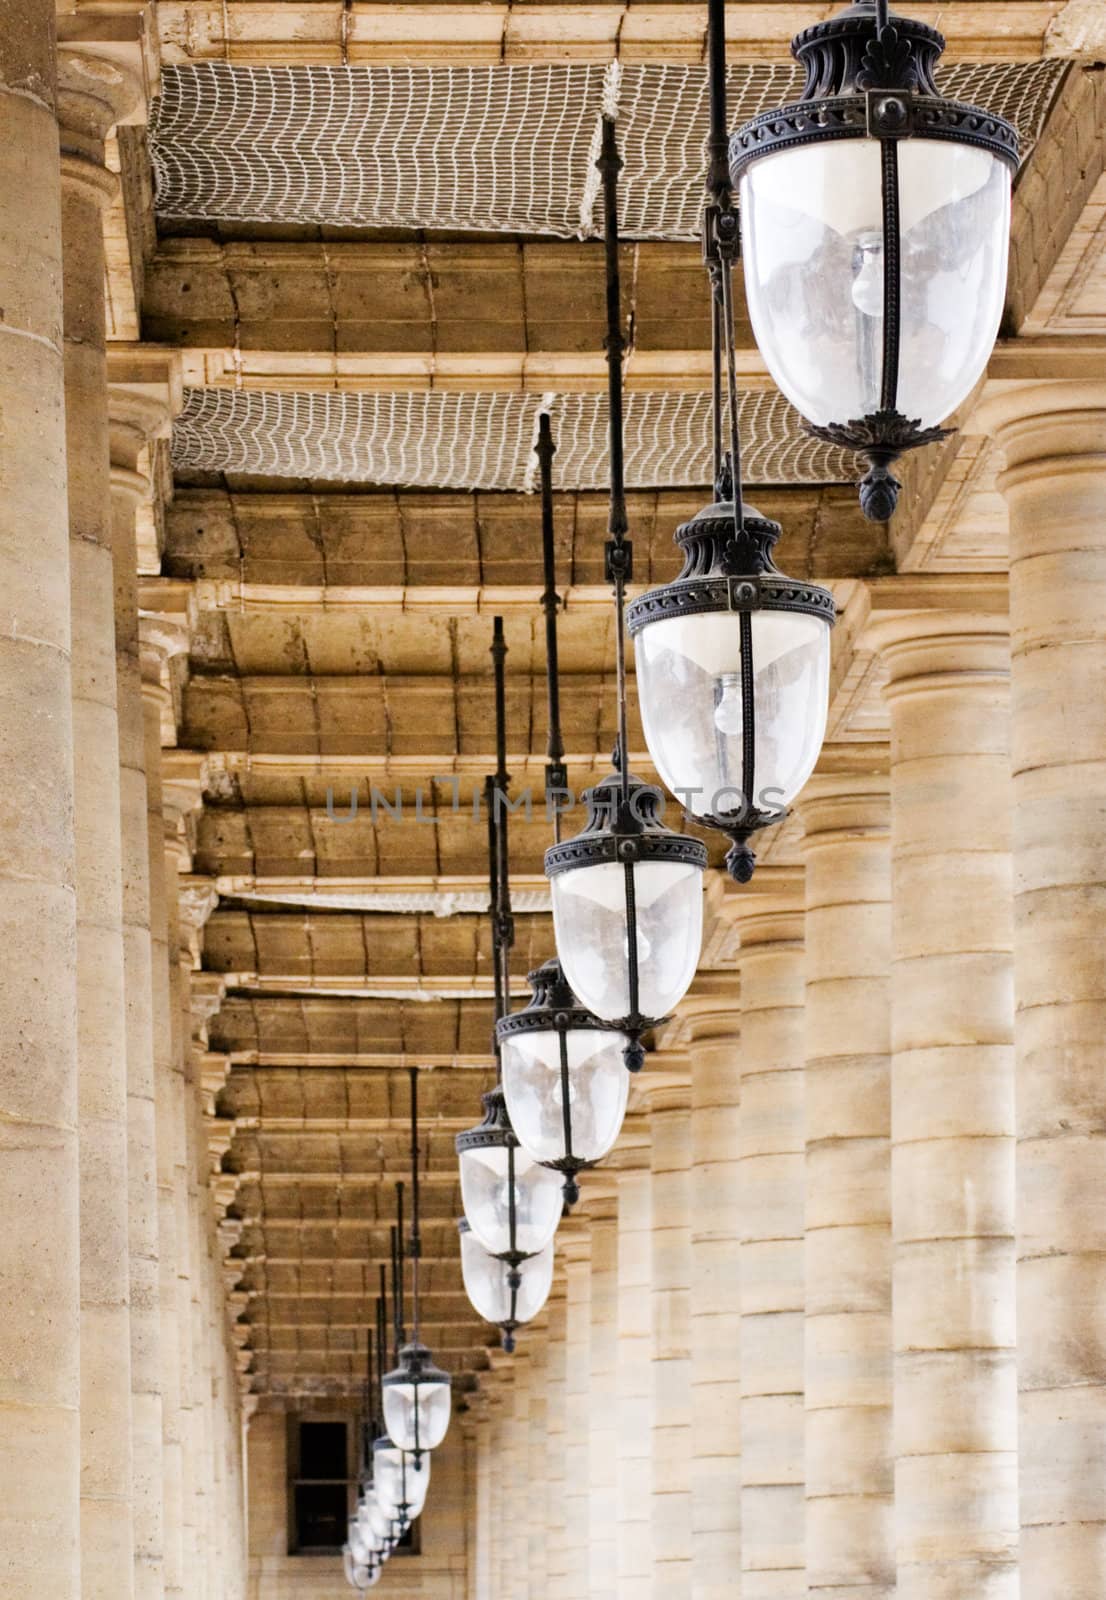 Old archway with hanging lamps.